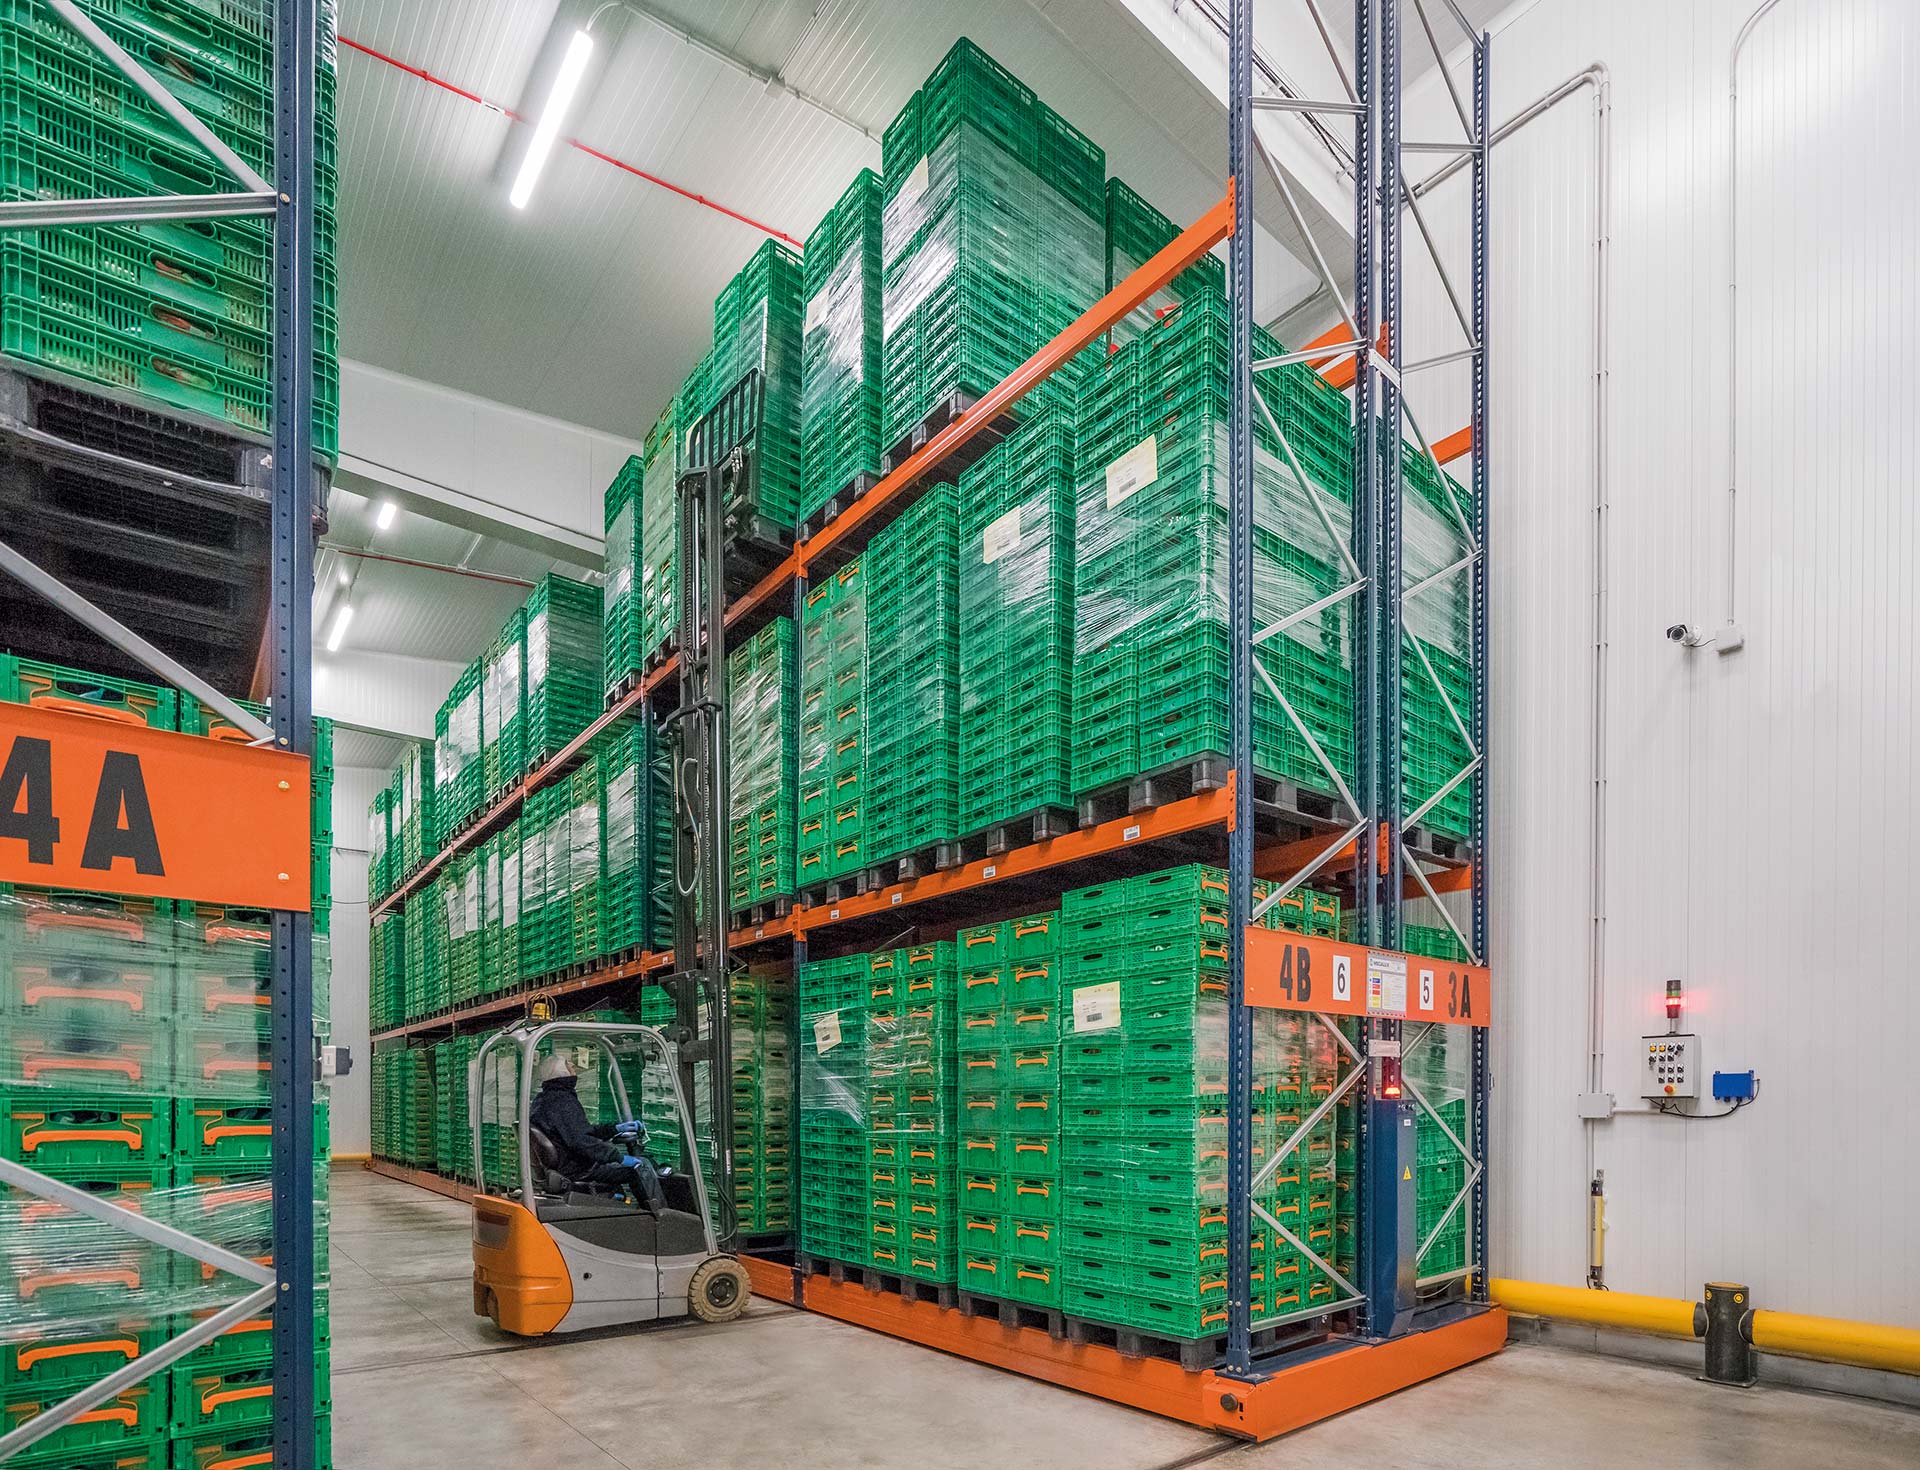 This mobile storage system is ideal for the food industry, where there are usually few pallets per SKU